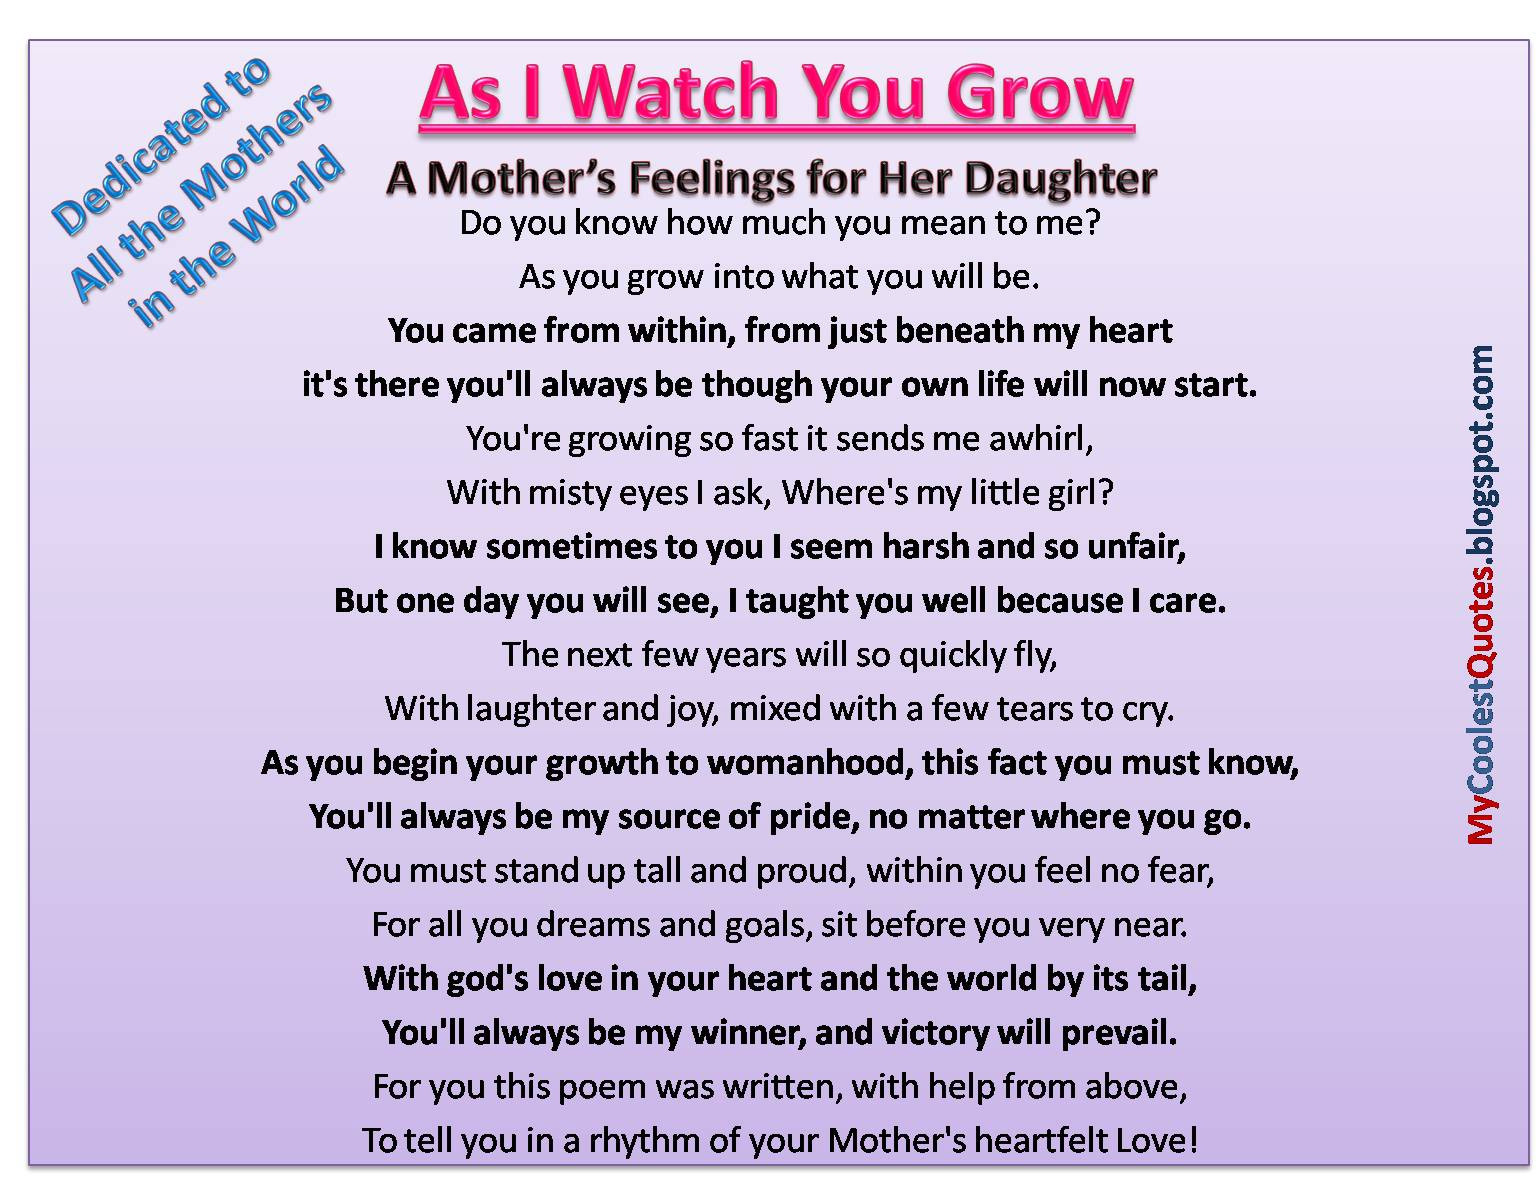 Quotes About Mothers Daughters
 My Coolest Quotes A Mother s Feelings for Her Daughter